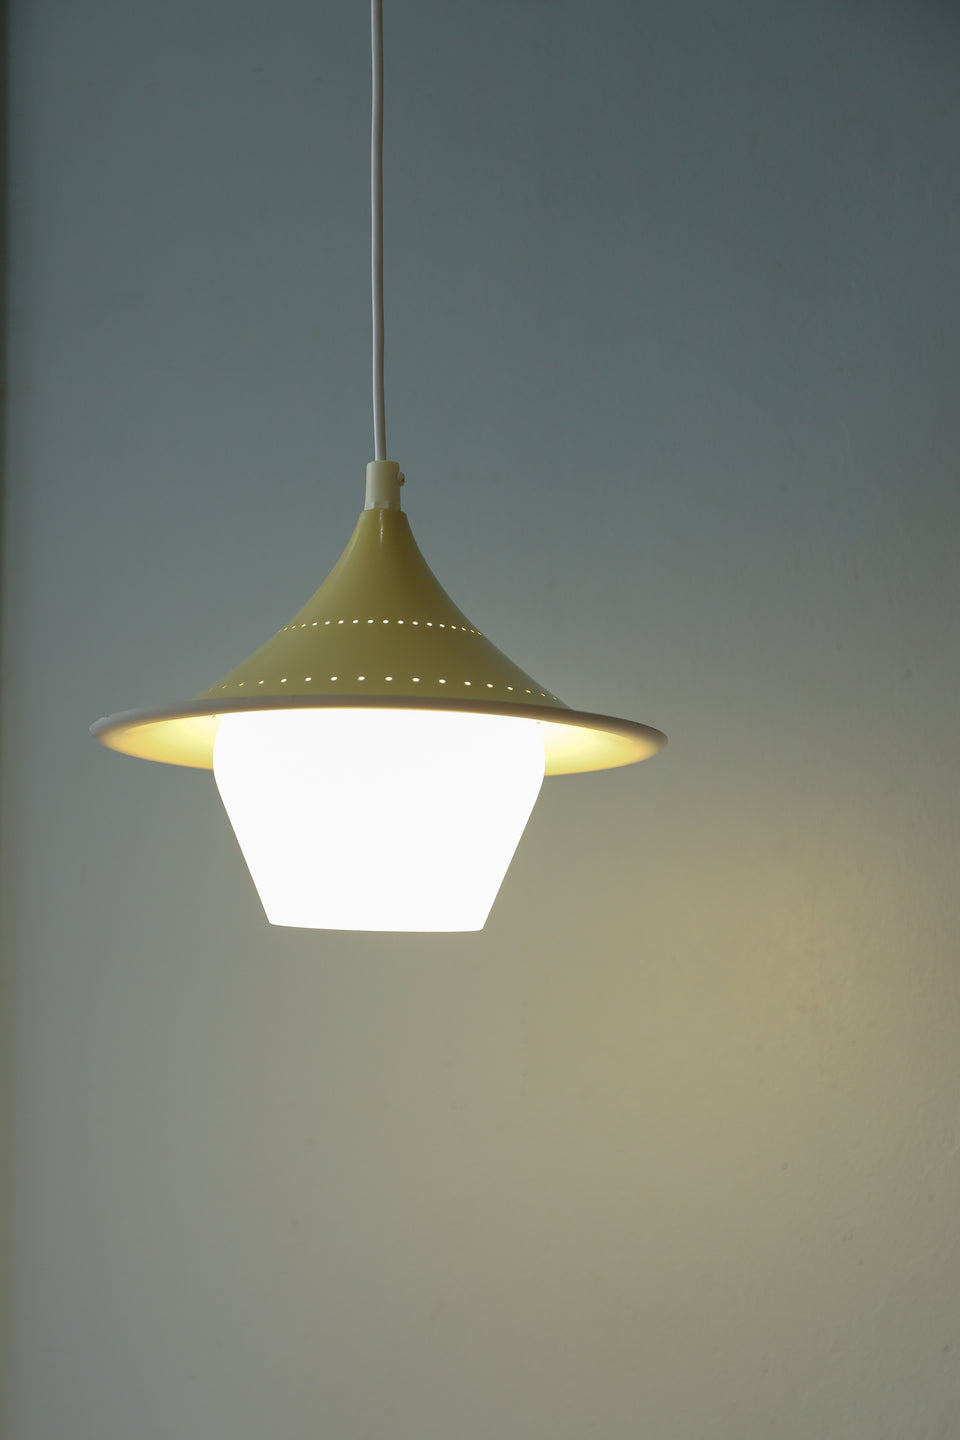 Frosted Glass Small Pendant Light Danish Vintage/デンマークヴィンテージ ペンダントライト フロストガラス 北欧インテリア